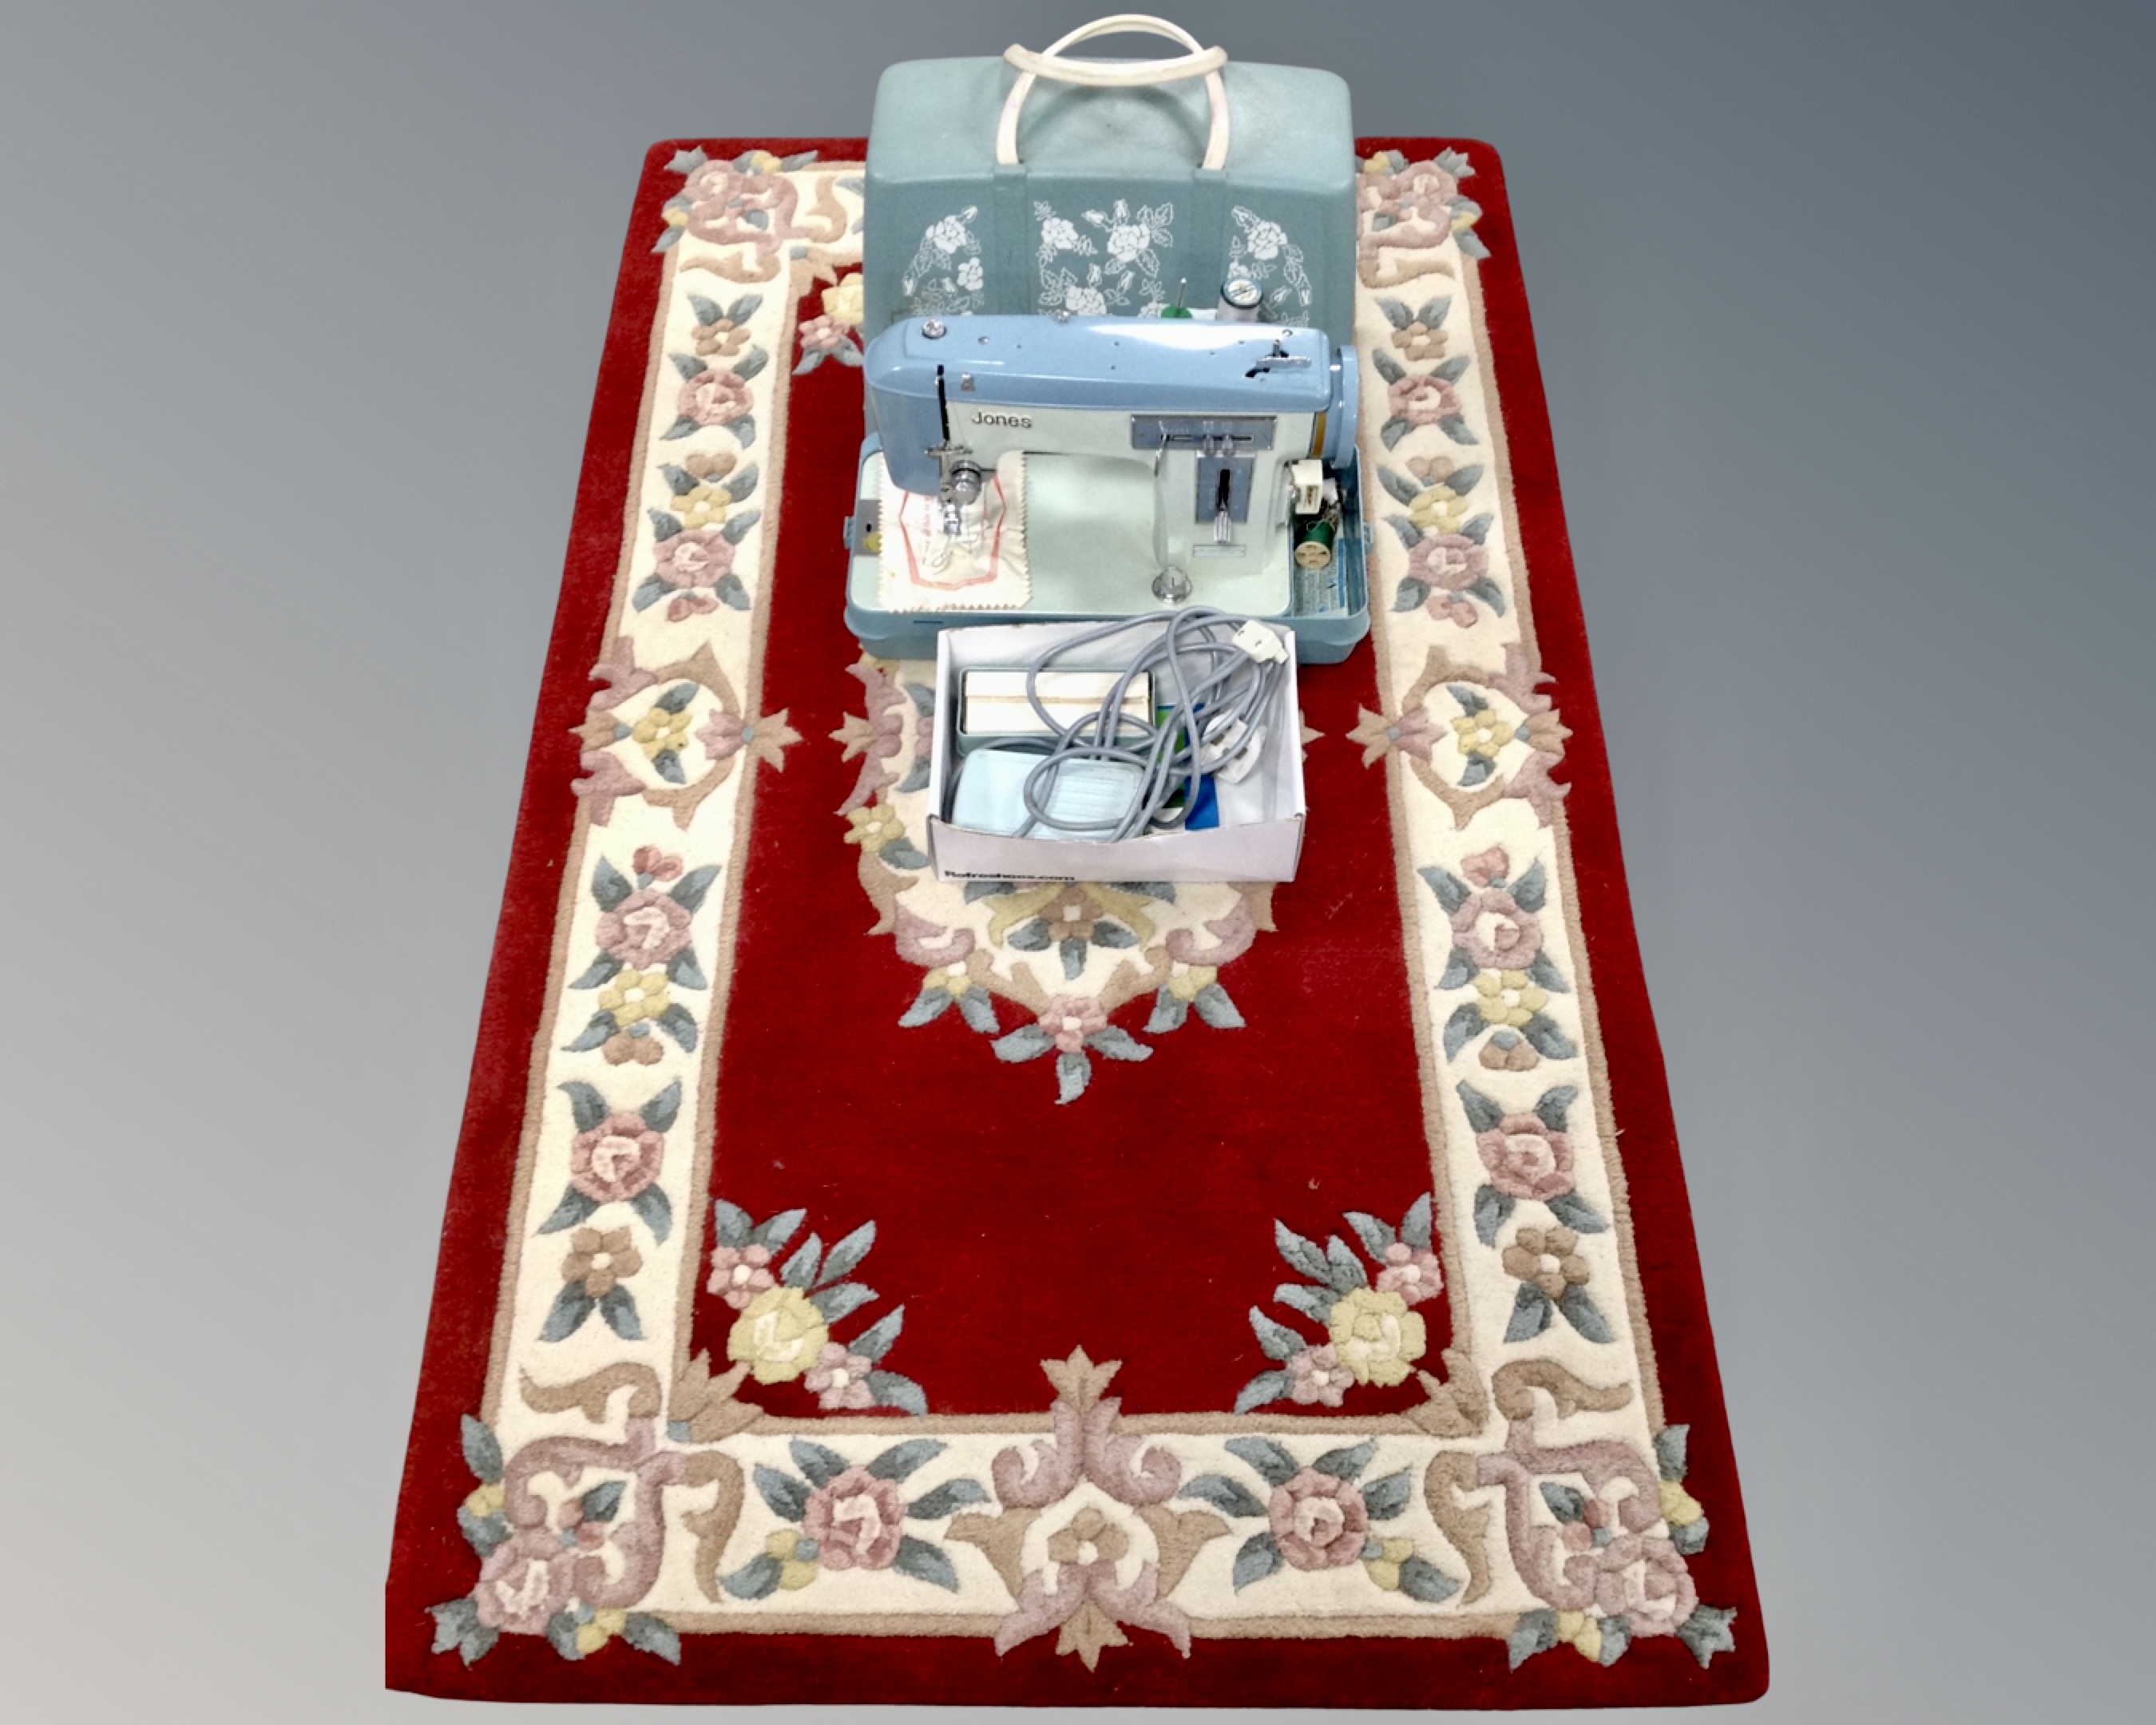 A Jones electric sewing machine with lead and pedal together with a Chinese rug on red ground.